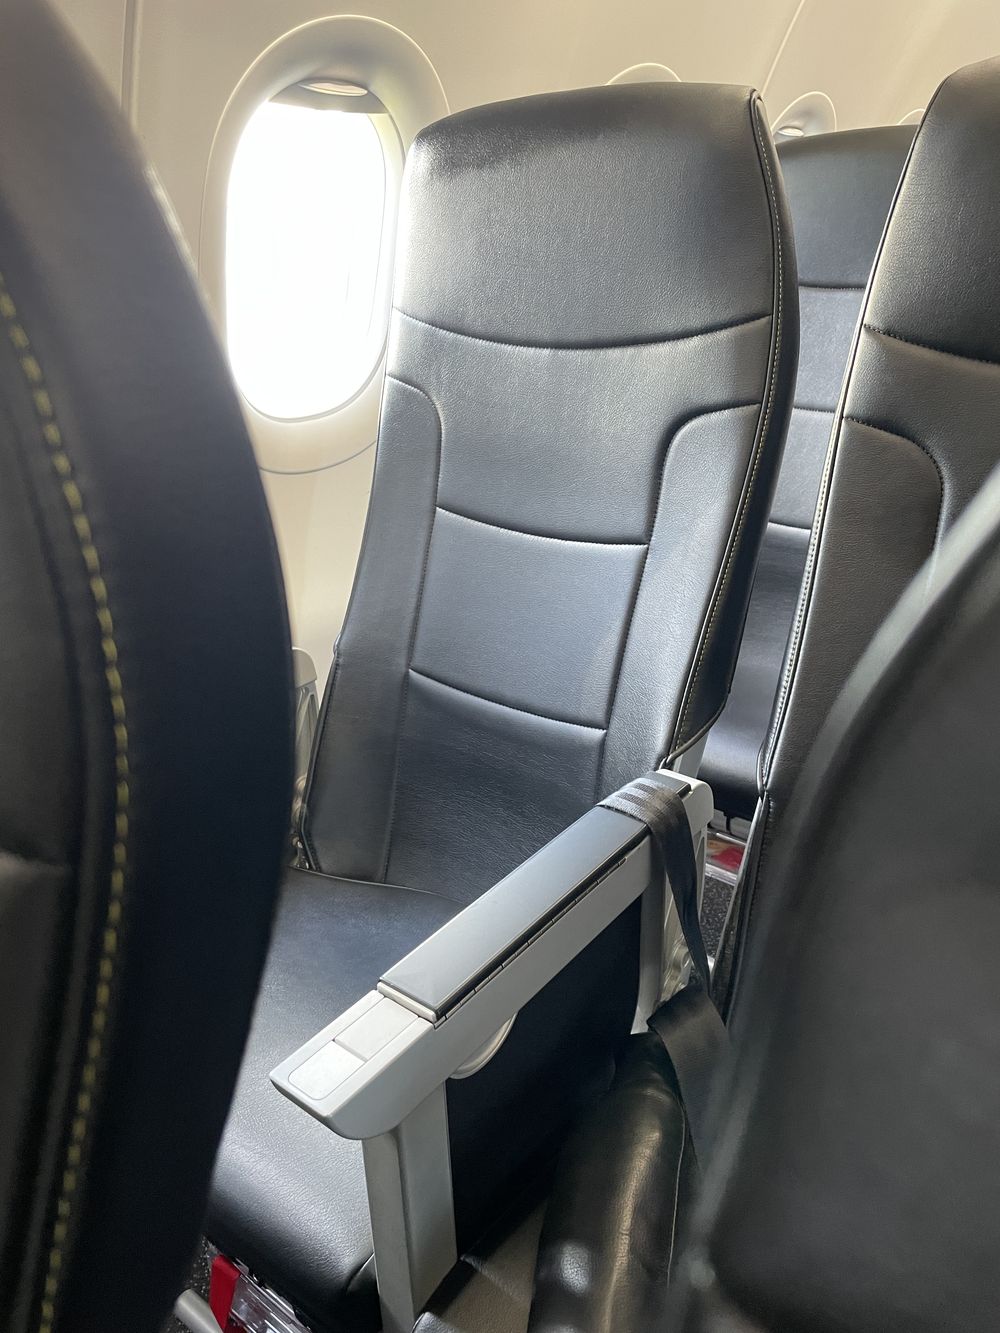 Spirit Airlines Review_Economy Seat_IMG_5618